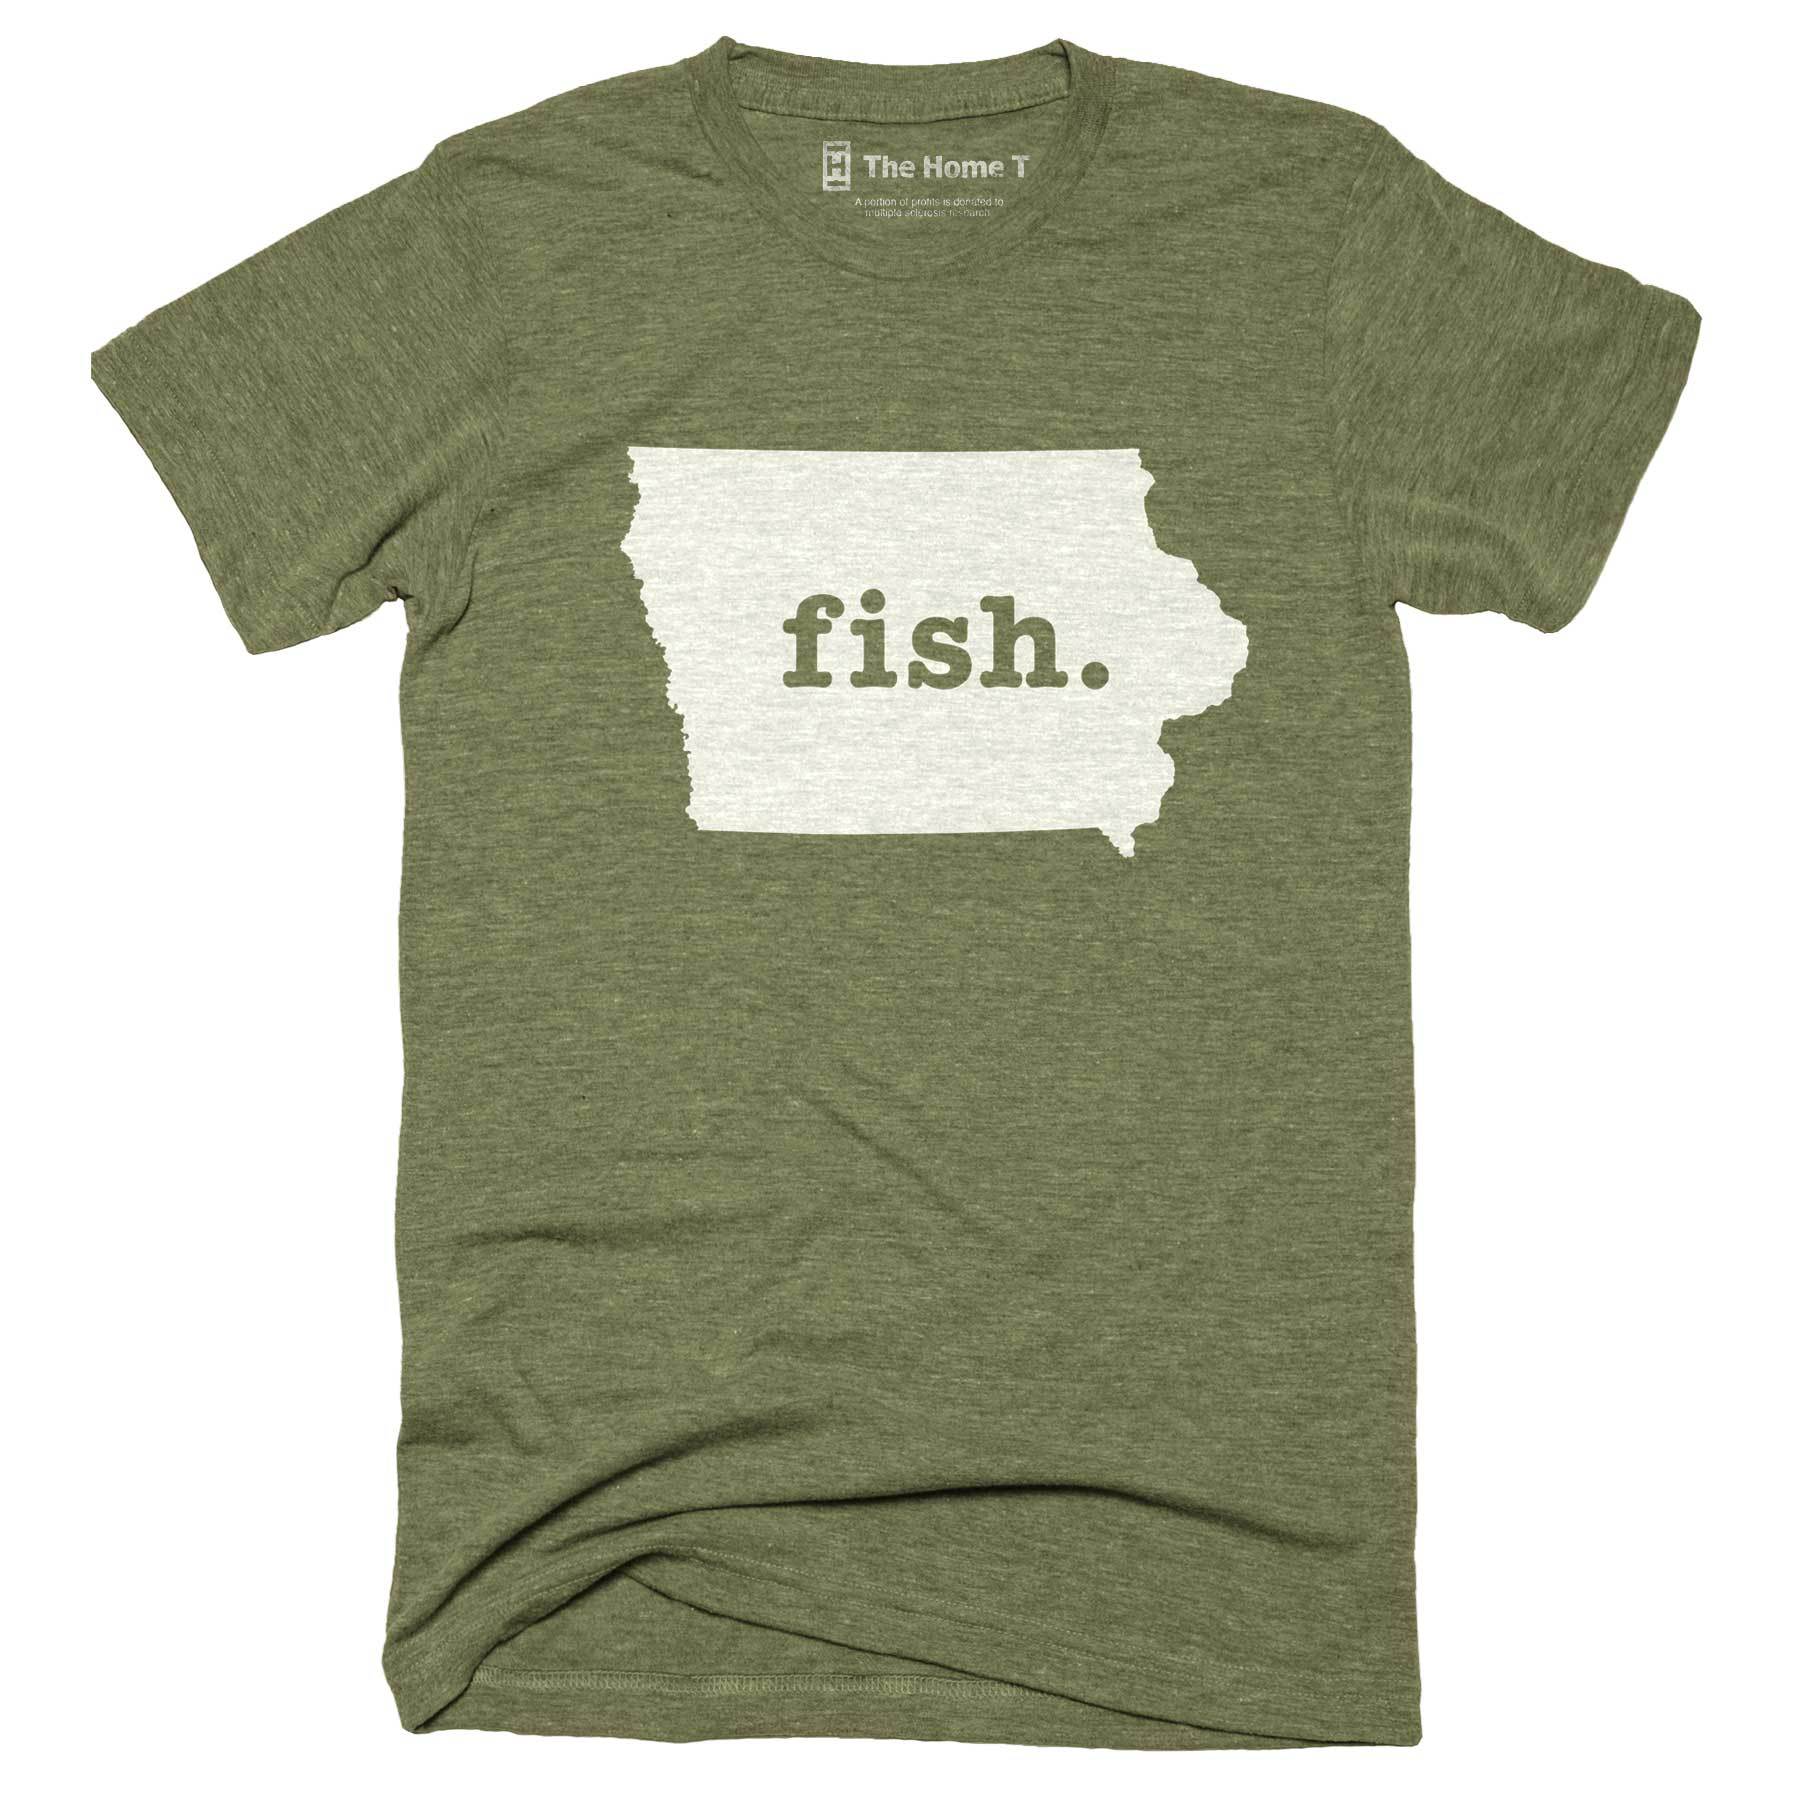 Iowa Fish Home T-Shirt Outdoor Collection The Home T XXL Army Green